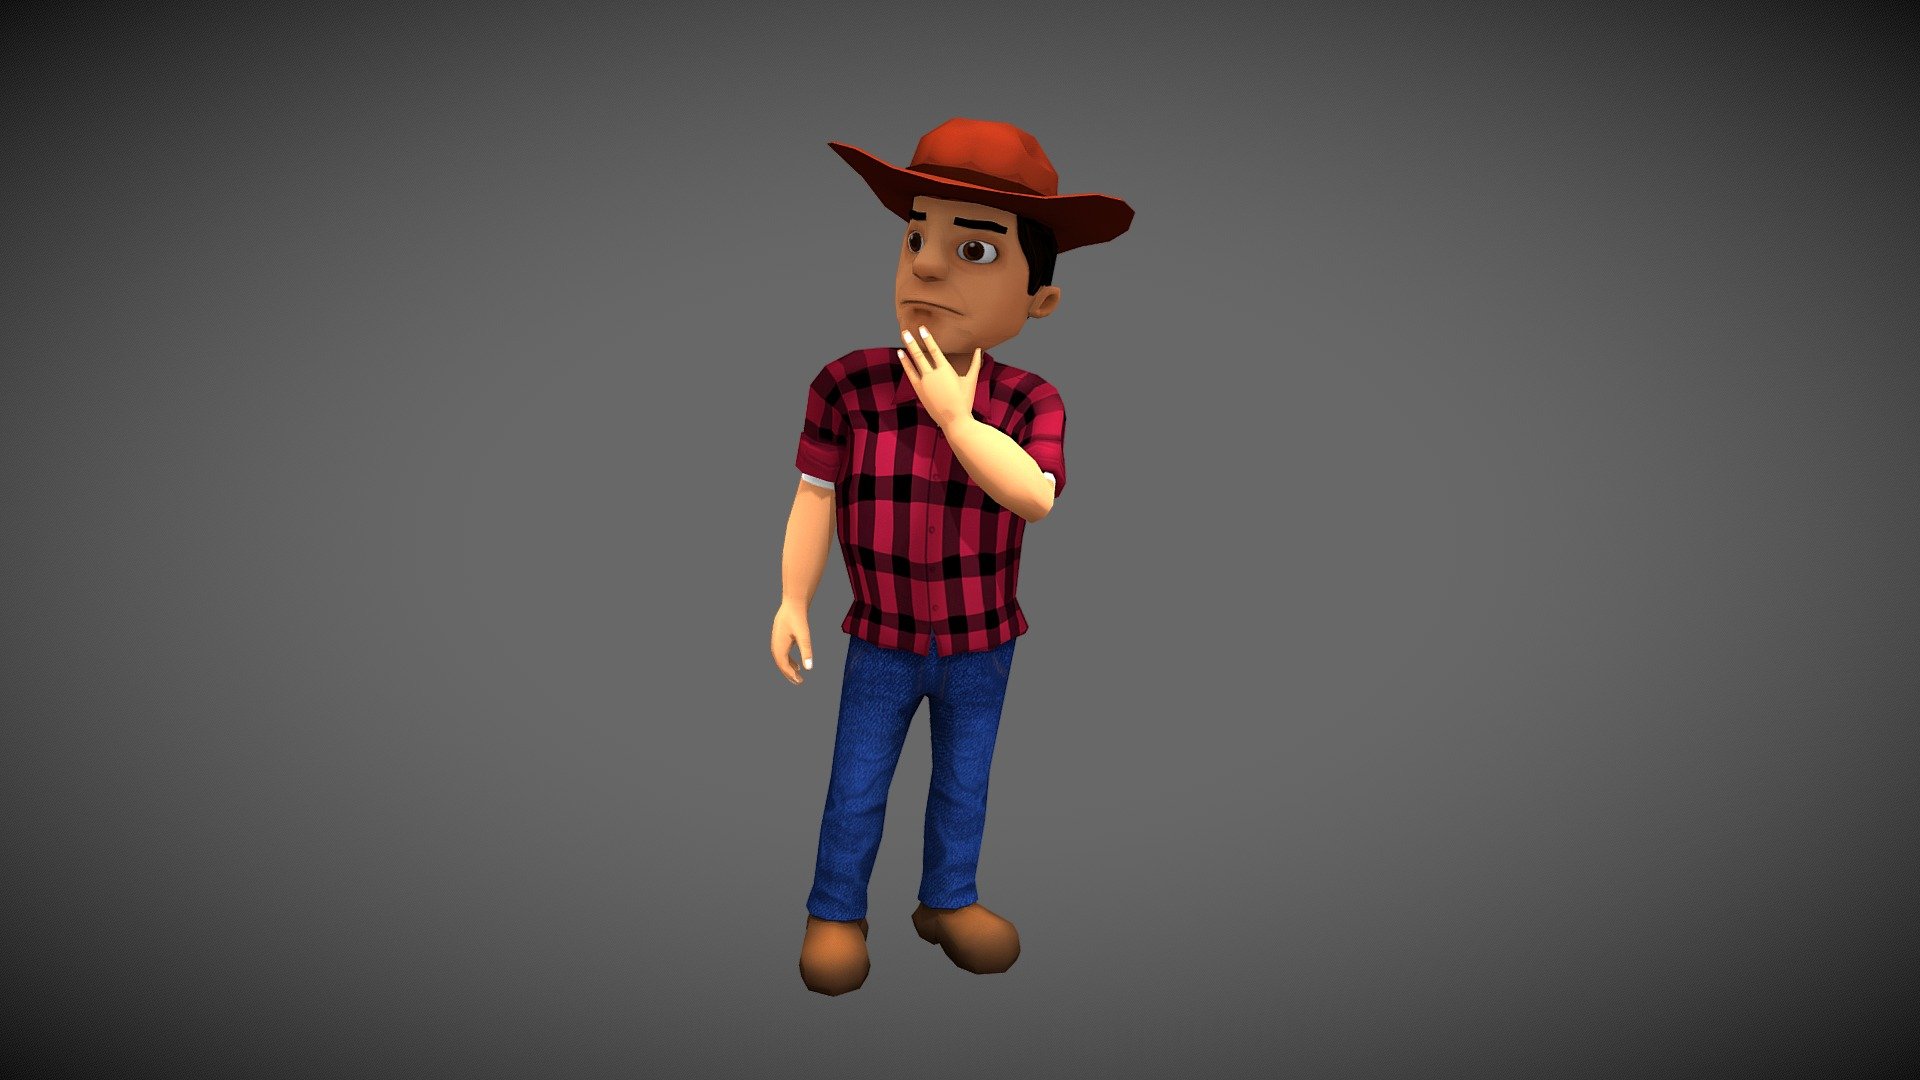 3D model of Farmer (who cultivates land or crops or raises animals) Rigged and Skinned, optimized for mobile game. 

Animations included:
Idle
Talk
Walk - Farmer Man - Buy Royalty Free 3D model by Team-Panda 3d model